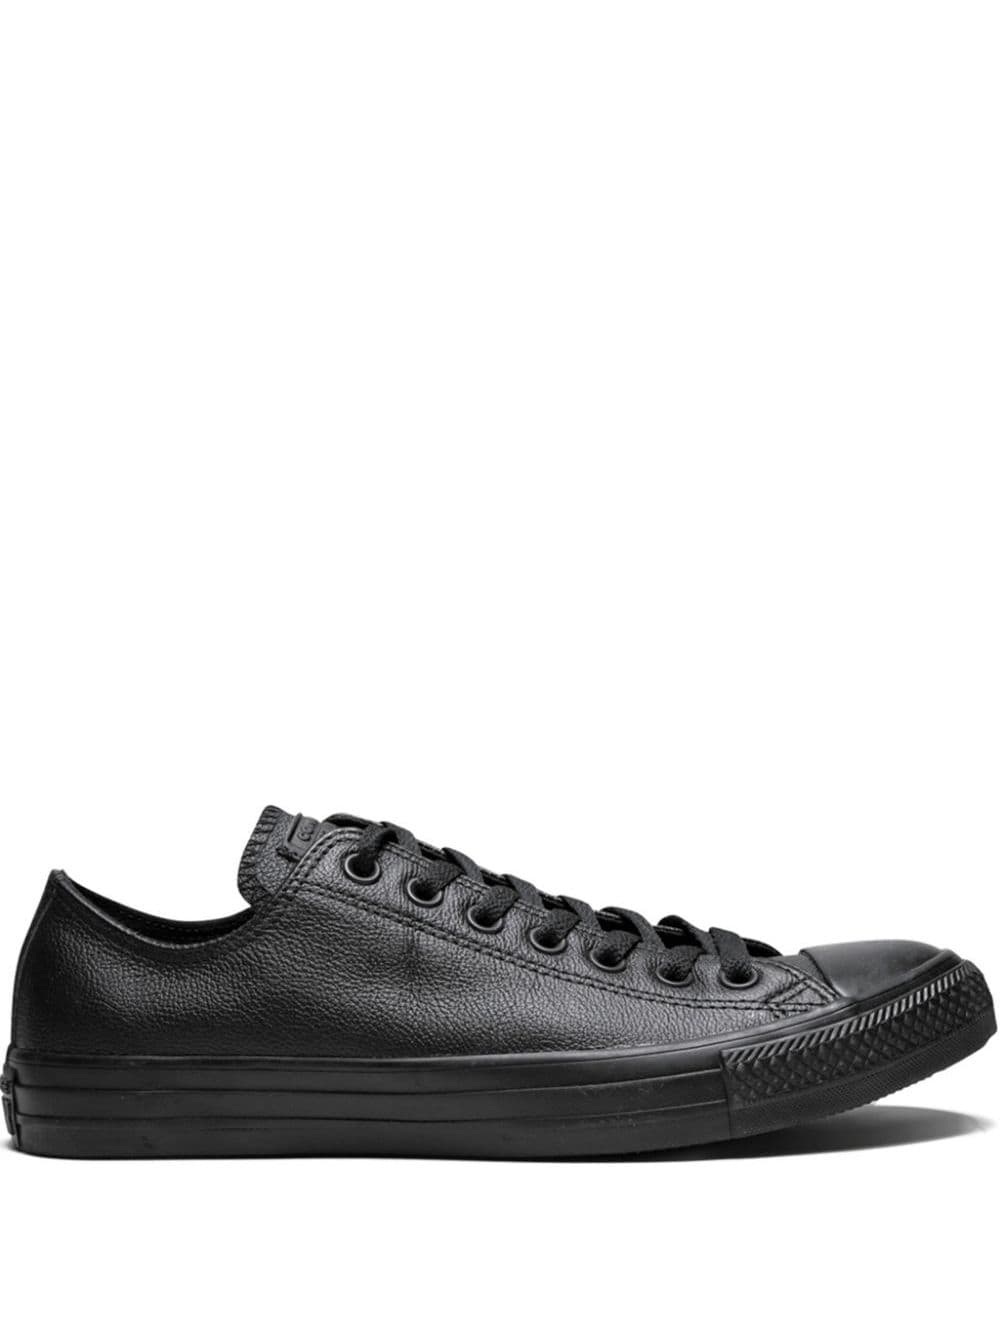 Converse Chuck Taylor All Star Ox "Black Leather" sneakers von Converse